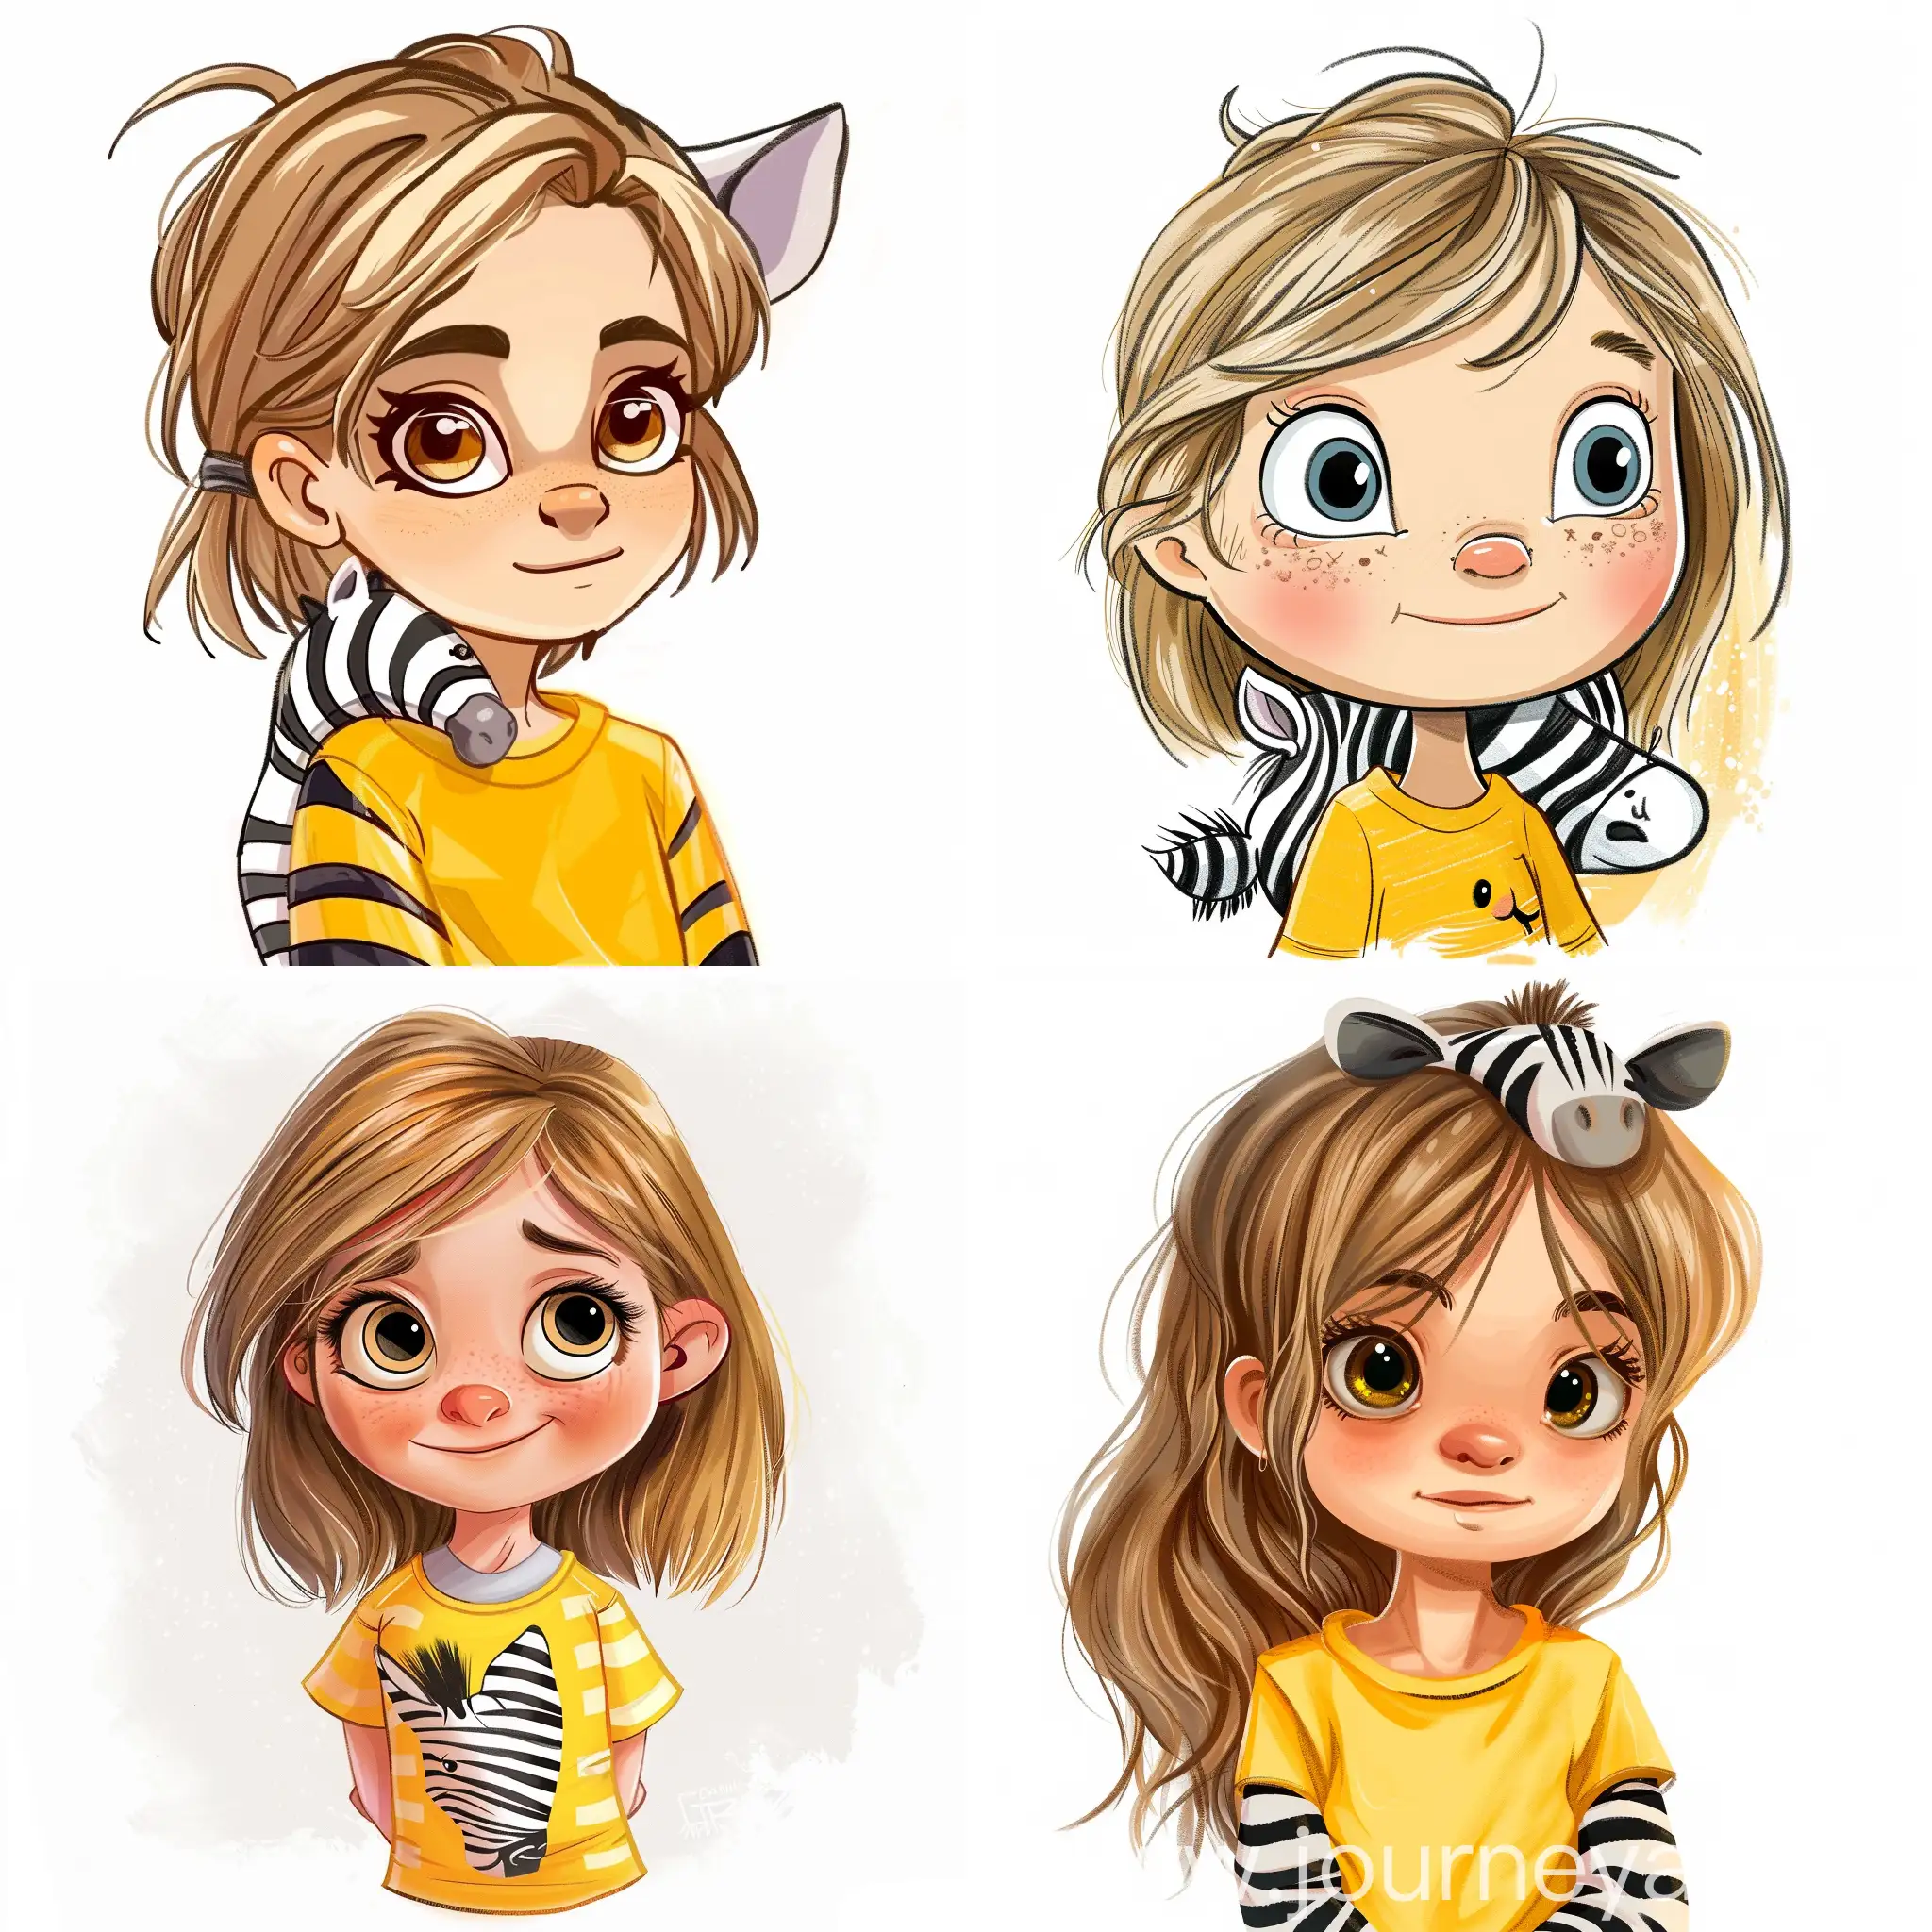 Cartoon of a young girl with sandy brown blonde hair wearing a bright yellow shirt with a zebra costume on